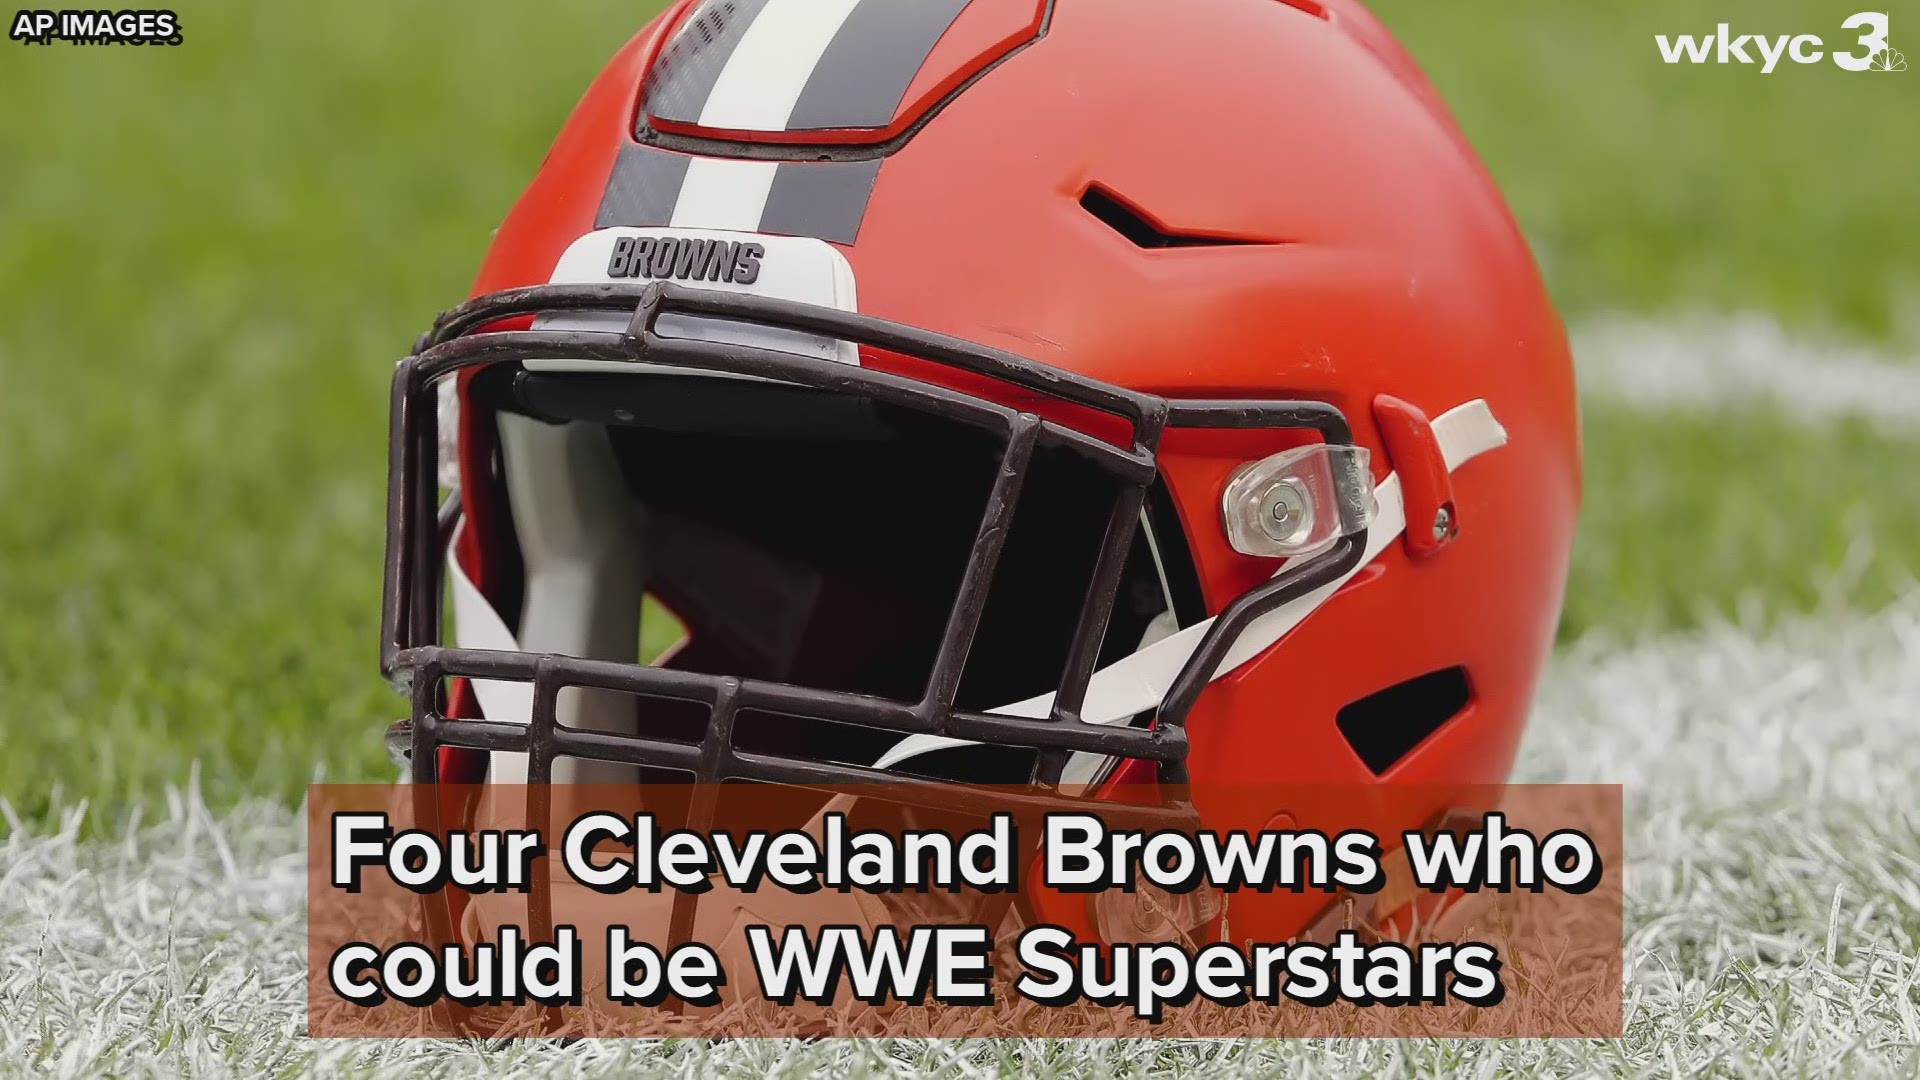 Several Cleveland Browns could do well for themselves if they ever changed sports and became professional wrestlers.  Who do you think would succeed in the ring?